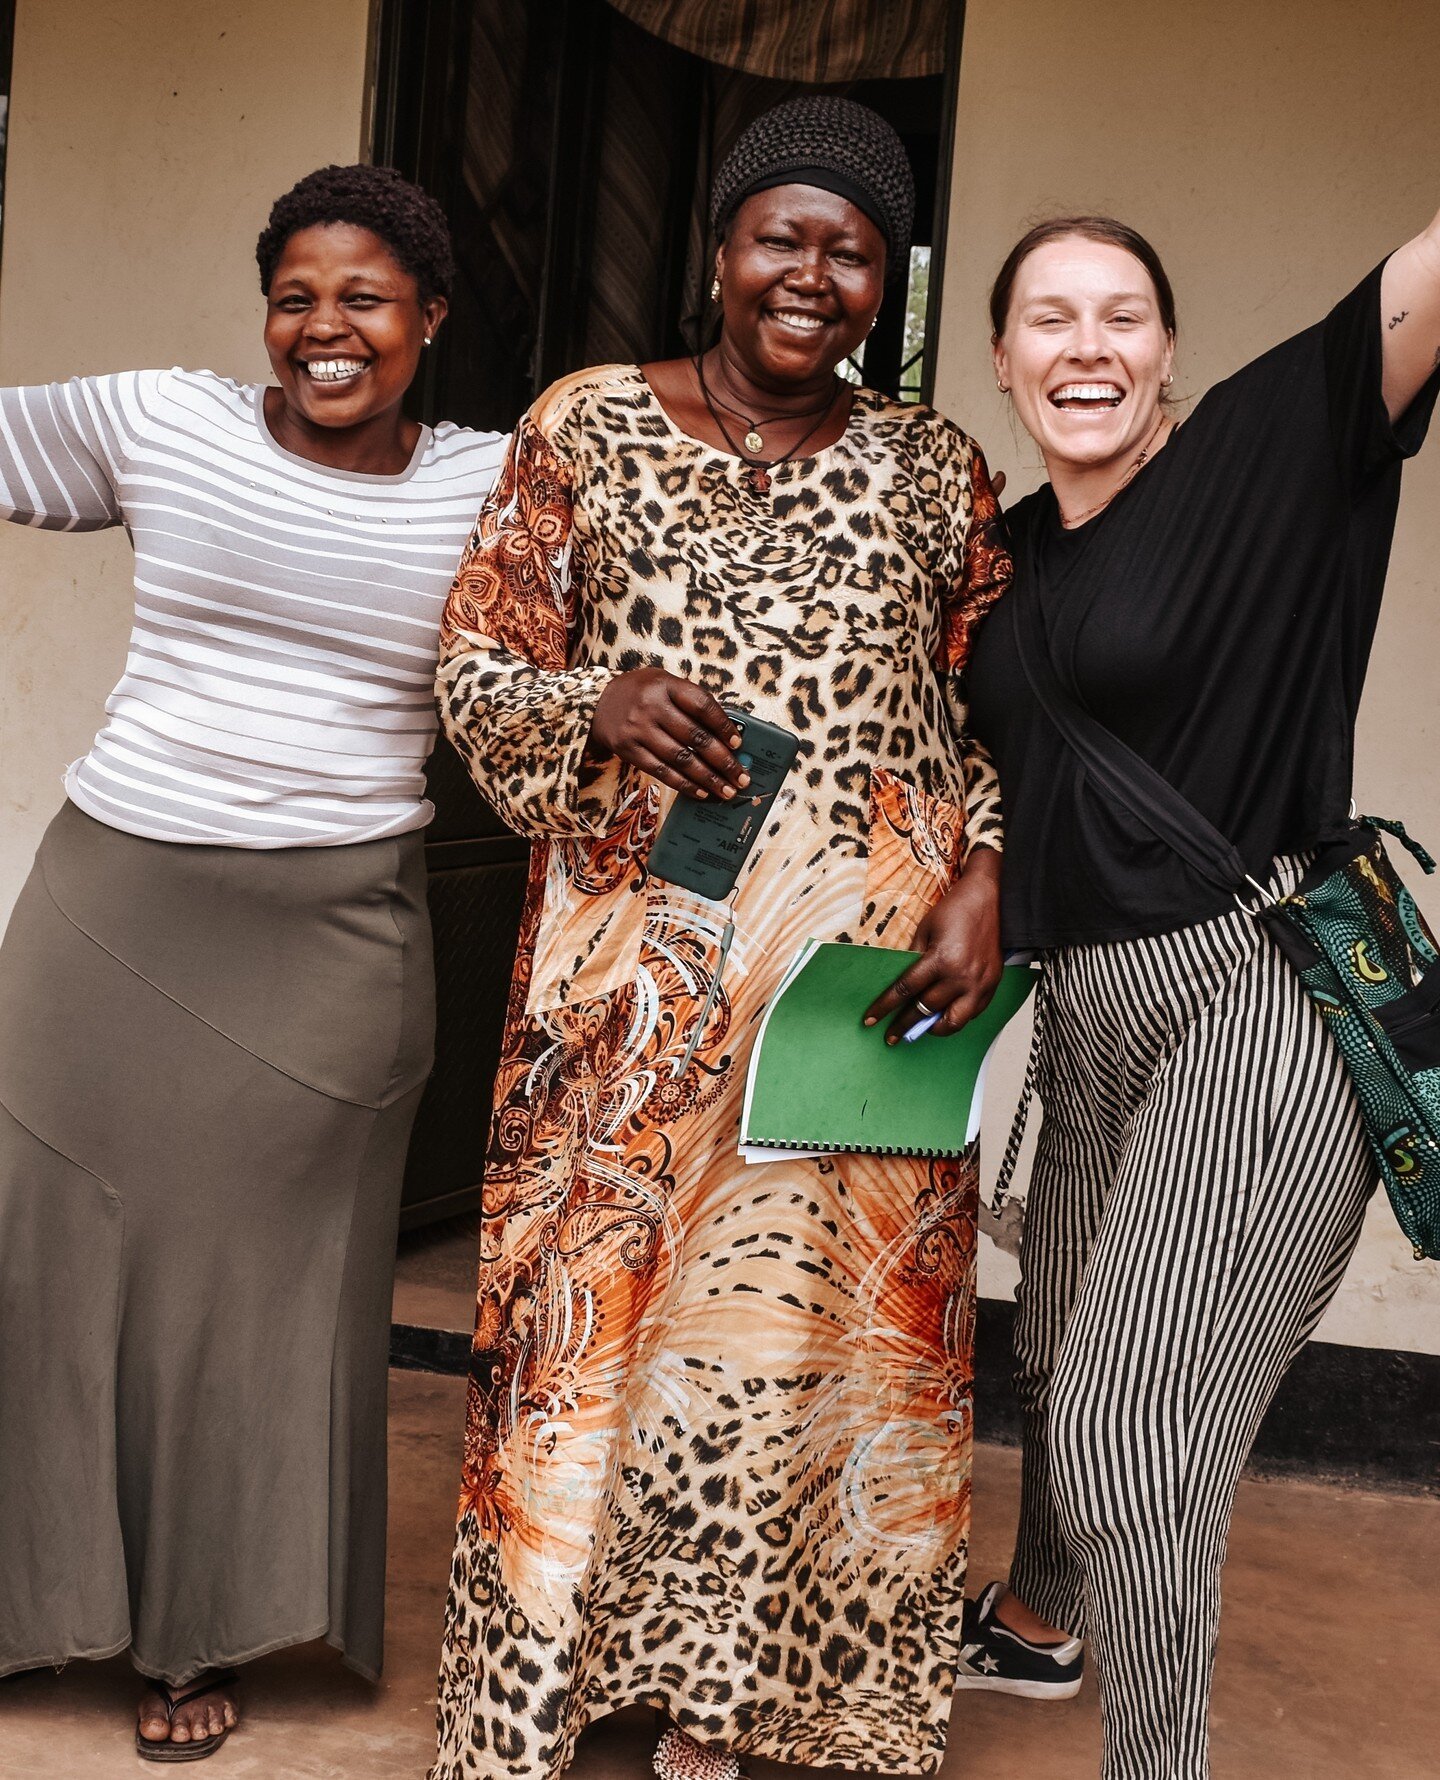 At the end of this month, our Founder is traveling to Uganda to visit the seven girls being sponsored to attend boarding school and connect with our local partners.⁠
⁠
We are so grateful to work alongside local partners who are passionate about empow